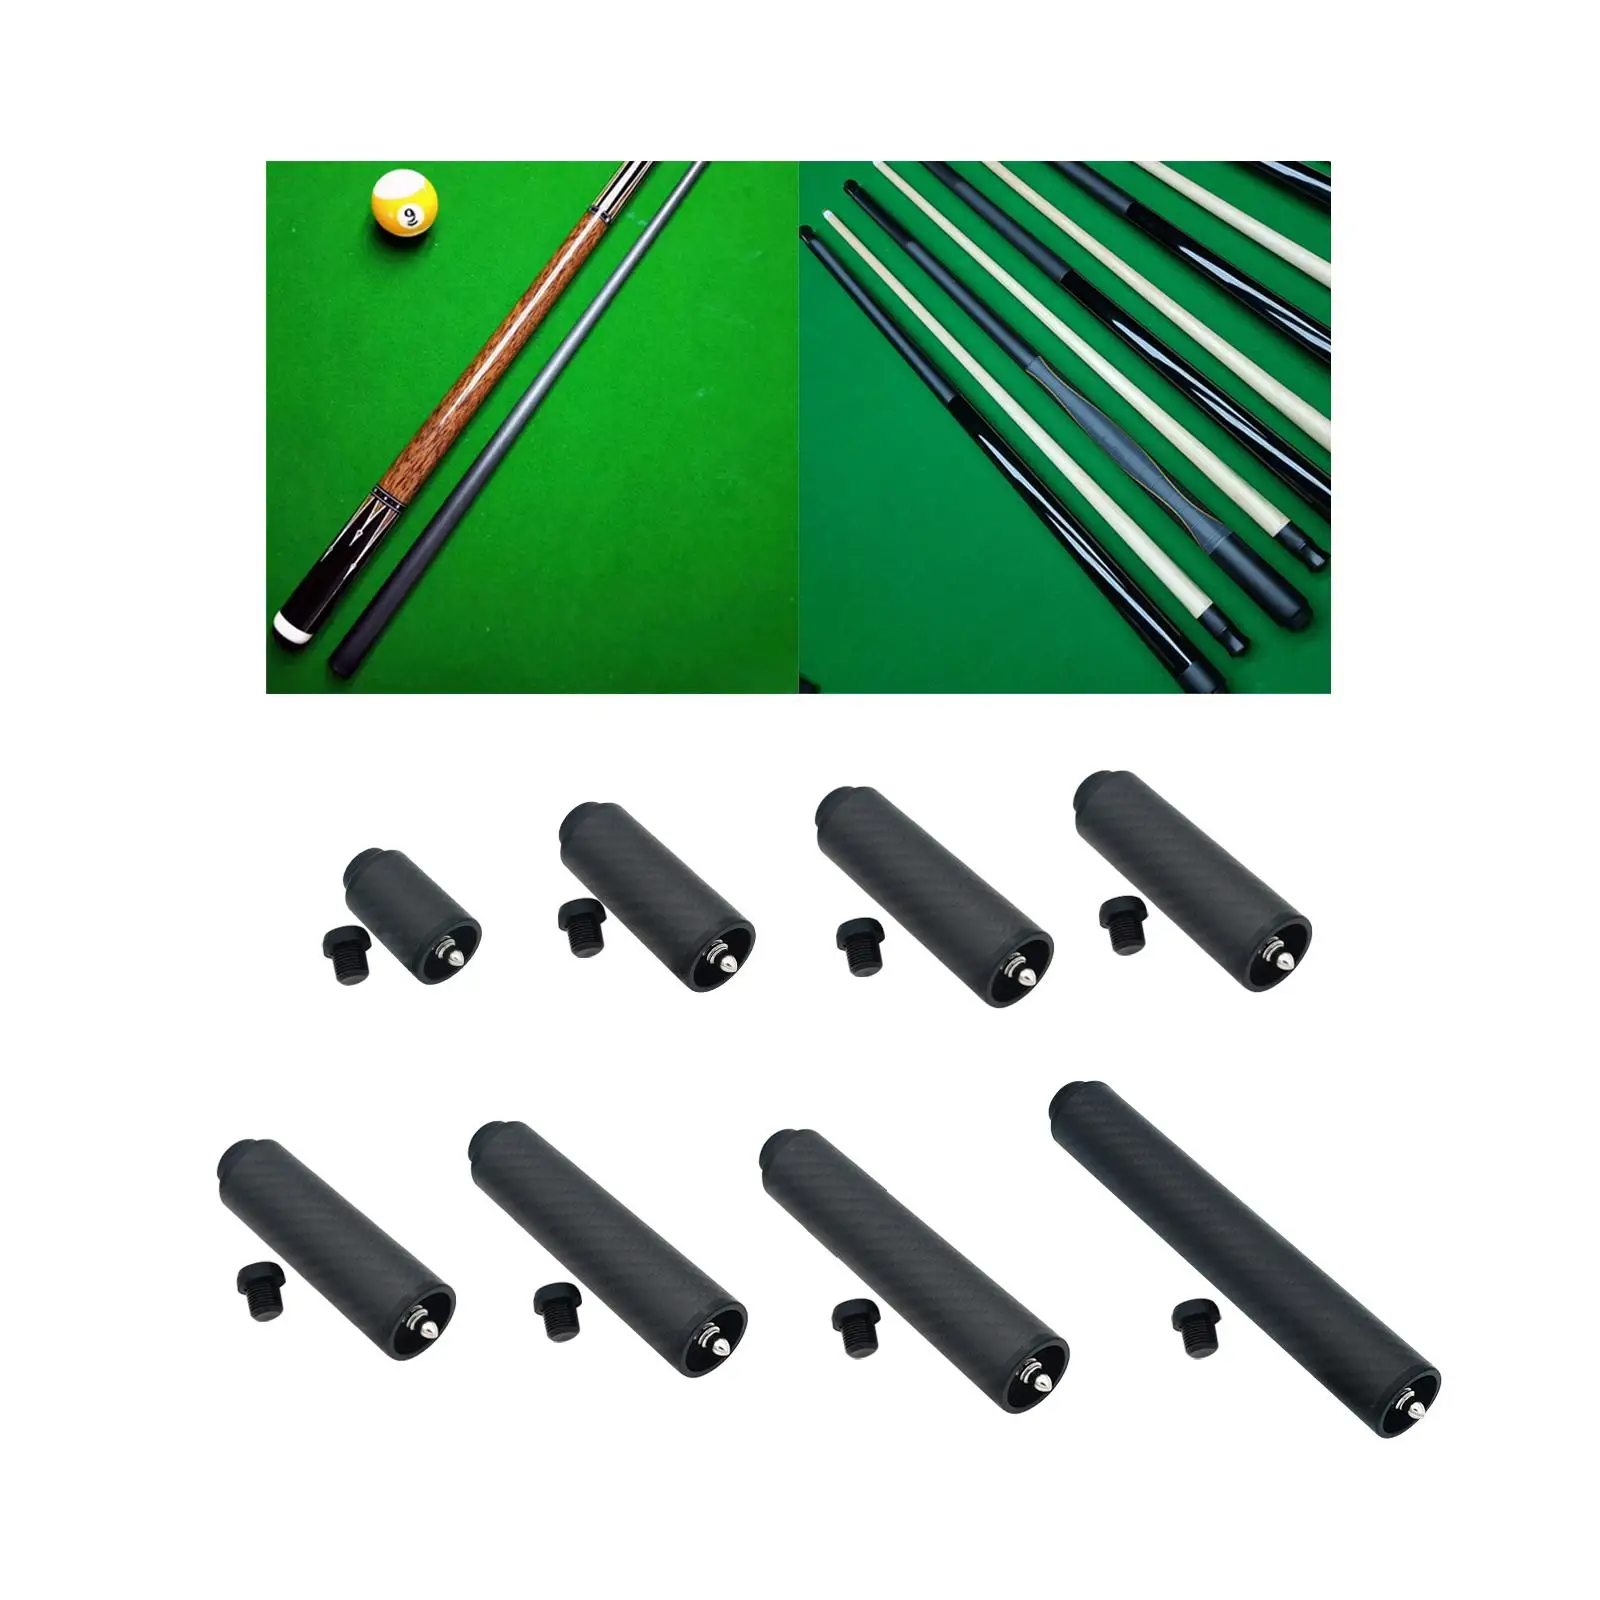 Billiards Pool Cue Extension Carbon Fiber Cue Joint Accessories Attachment Cue Stick Extender for Professional Beginners Athlete